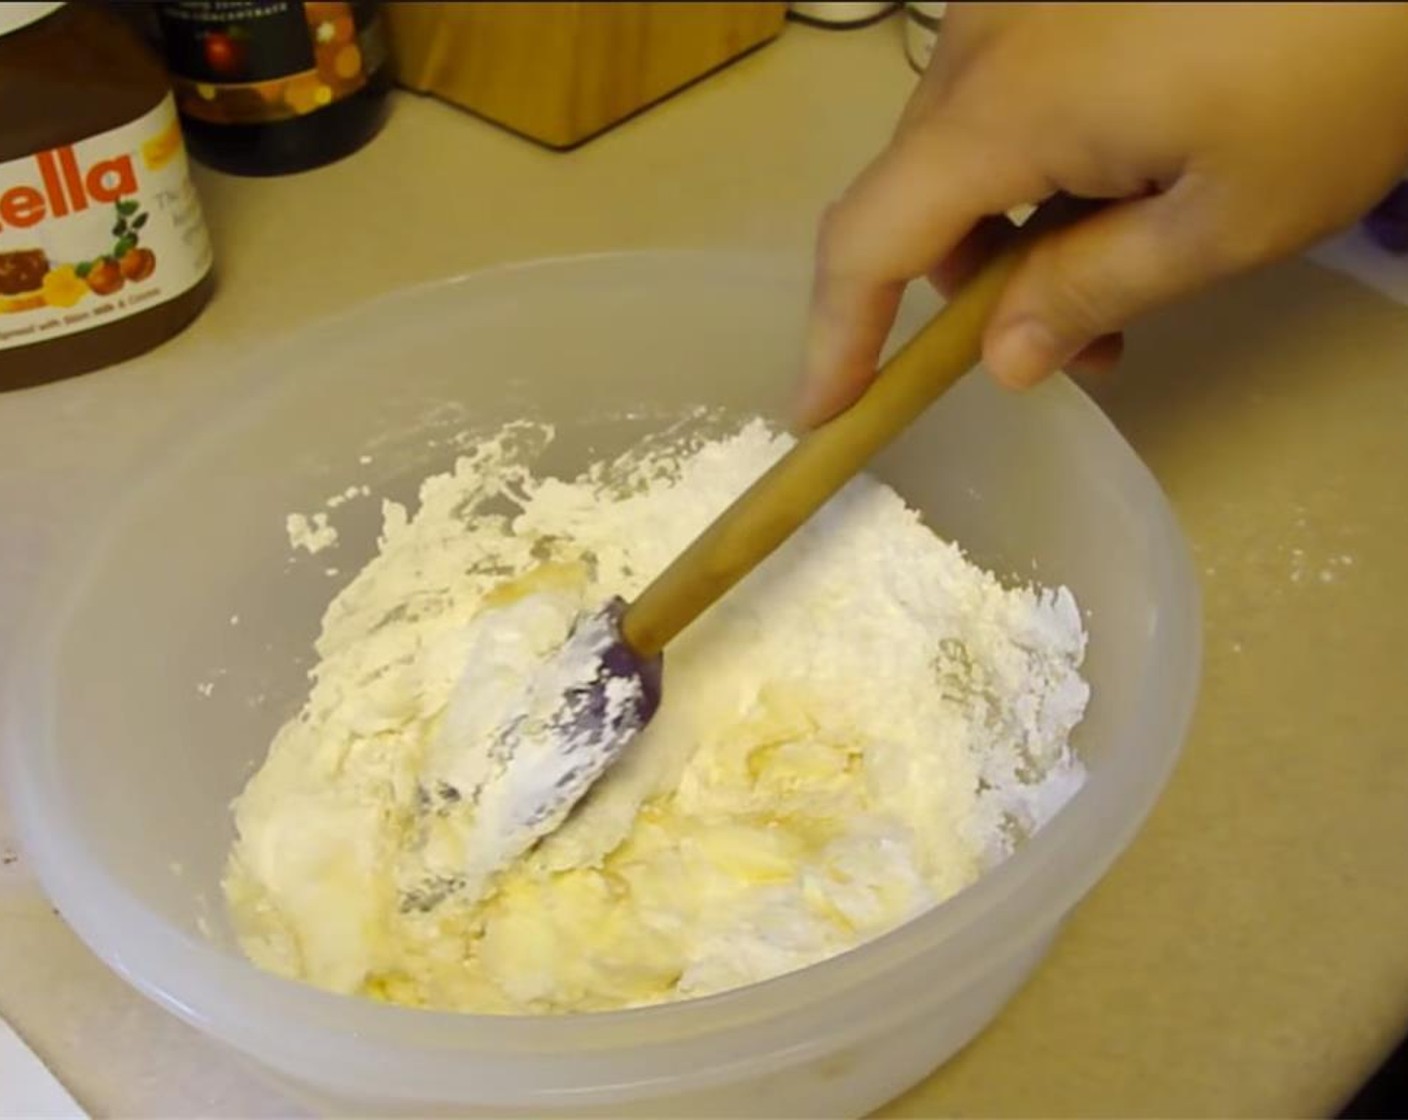 step 4 In a small bowl, stir together the Cream Cheese (1 cup), Powdered Confectioners Sugar (3/4 cup), and Vanilla Extract (1/2 Tbsp). Microwave on high for 10-15 seconds, or until soft and easy to pour.